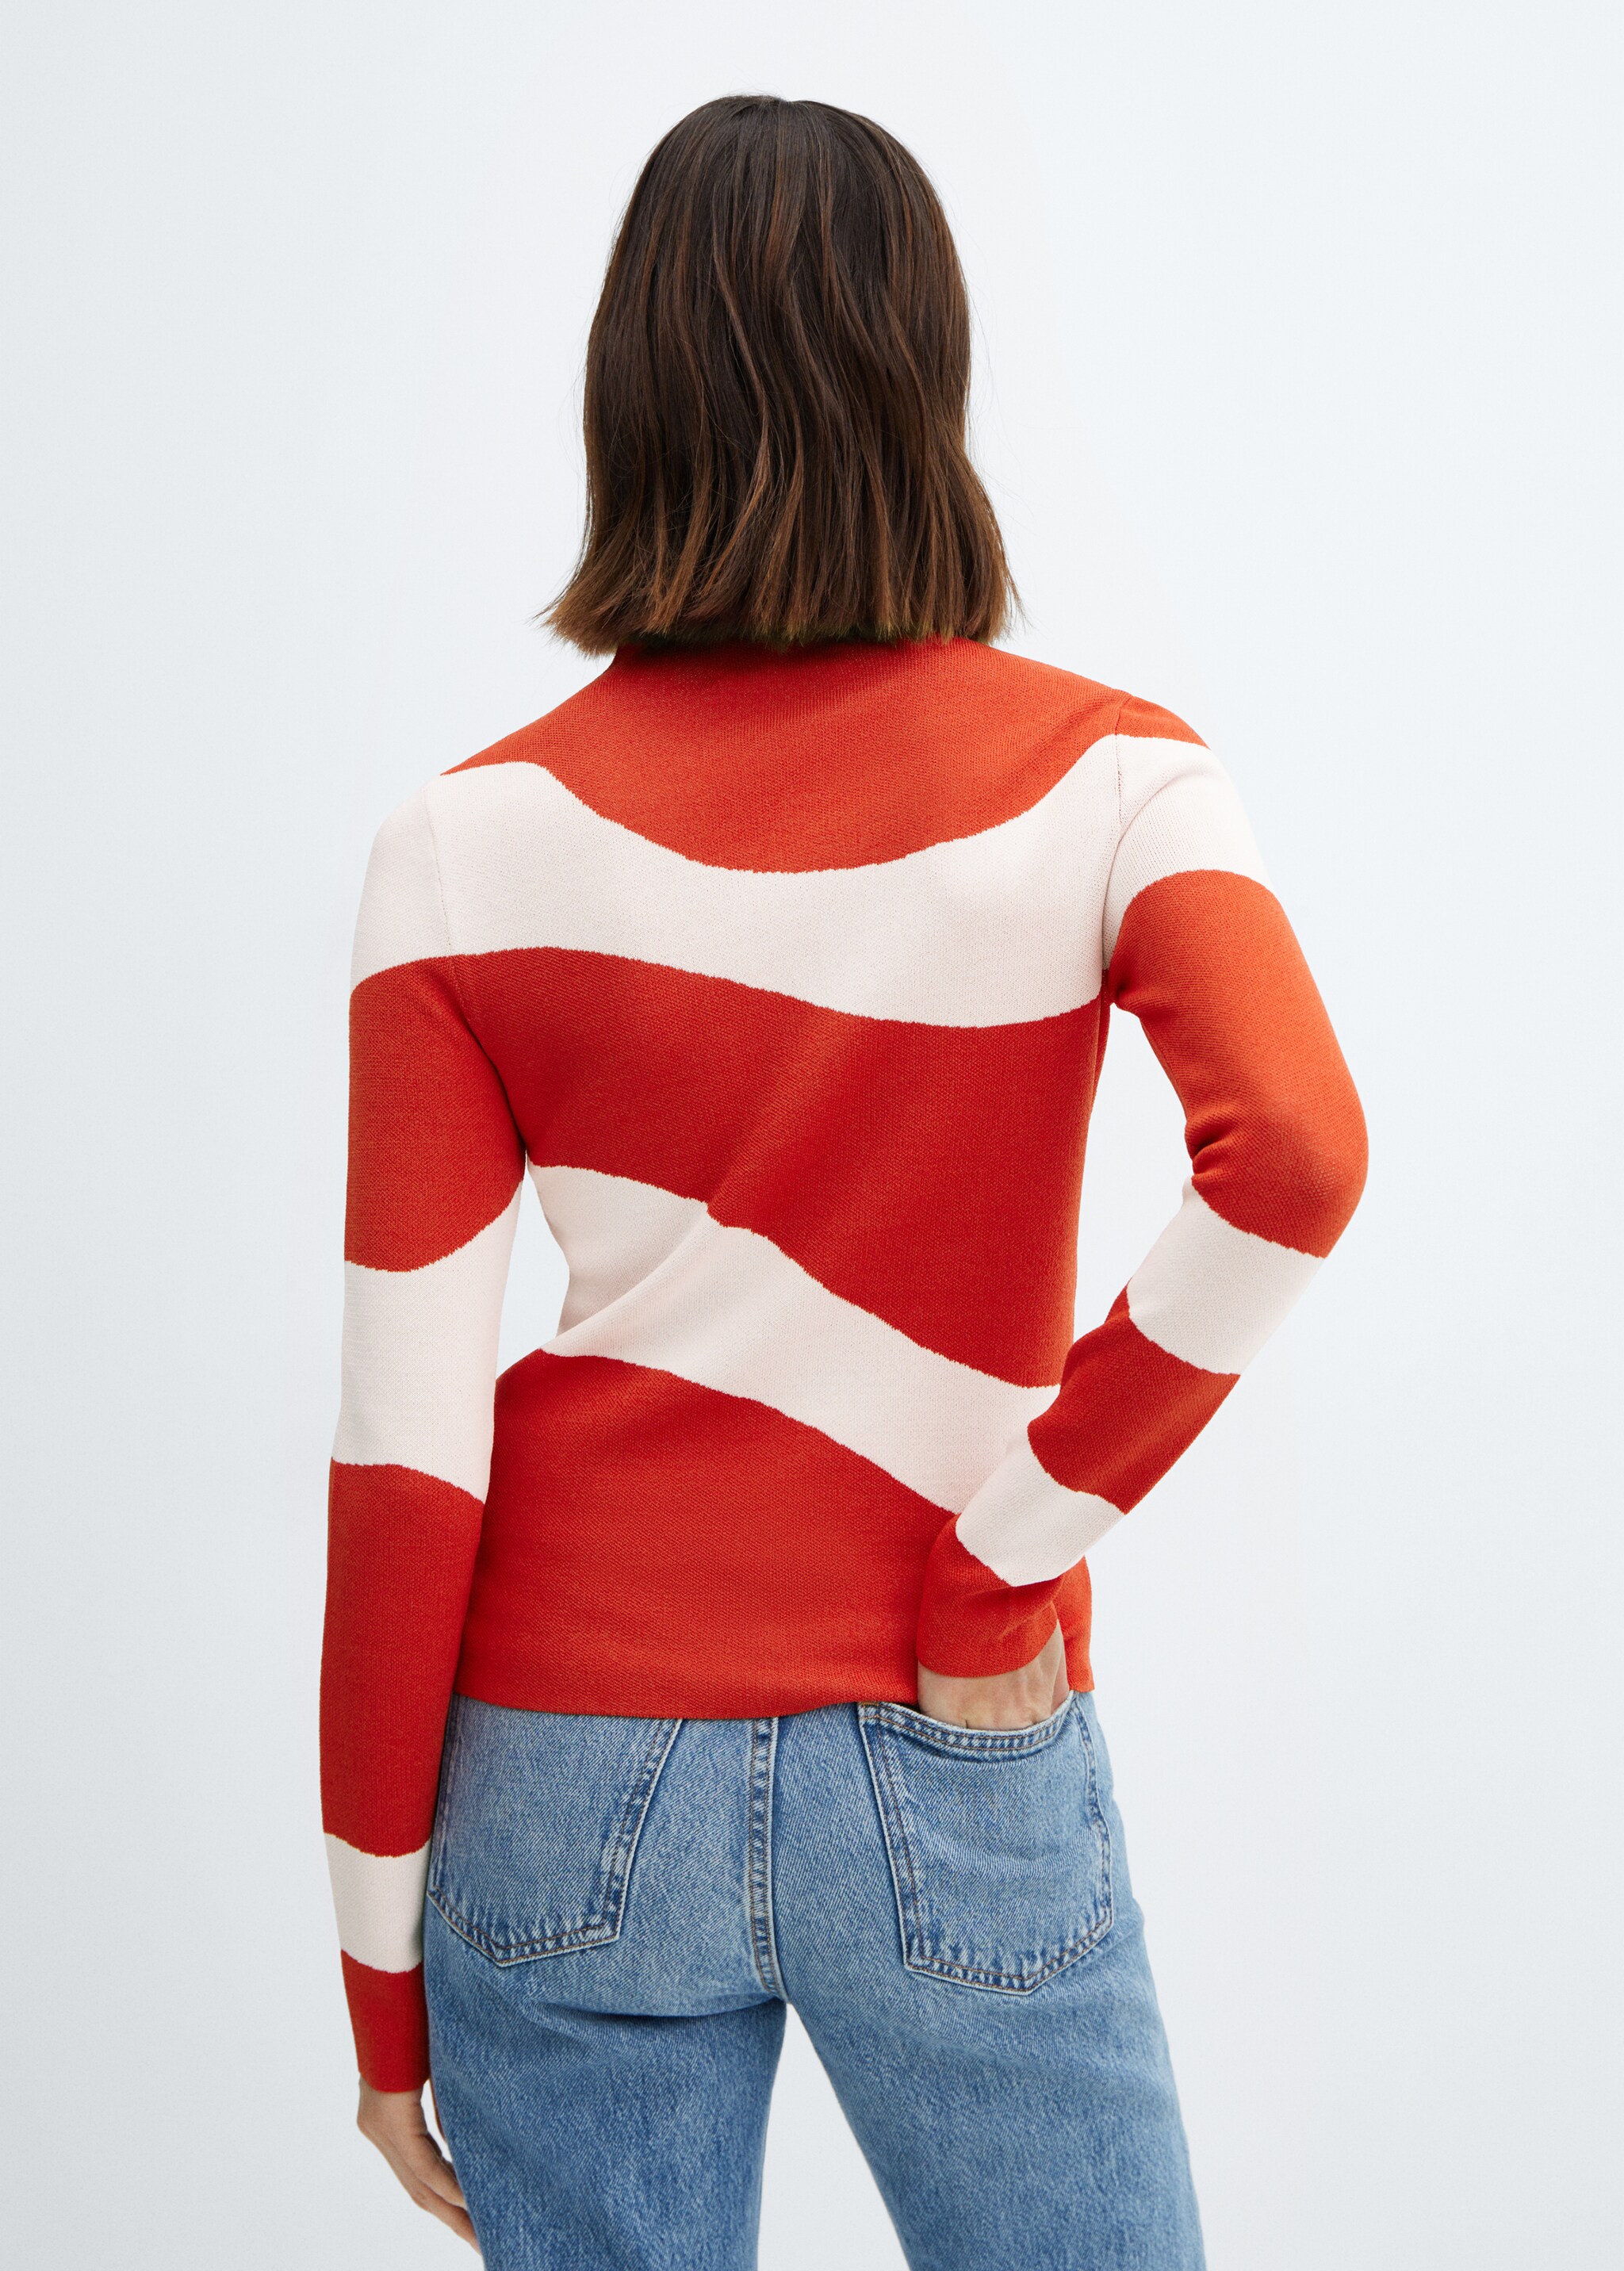 Perkins neck knitted sweater - Reverse of the article